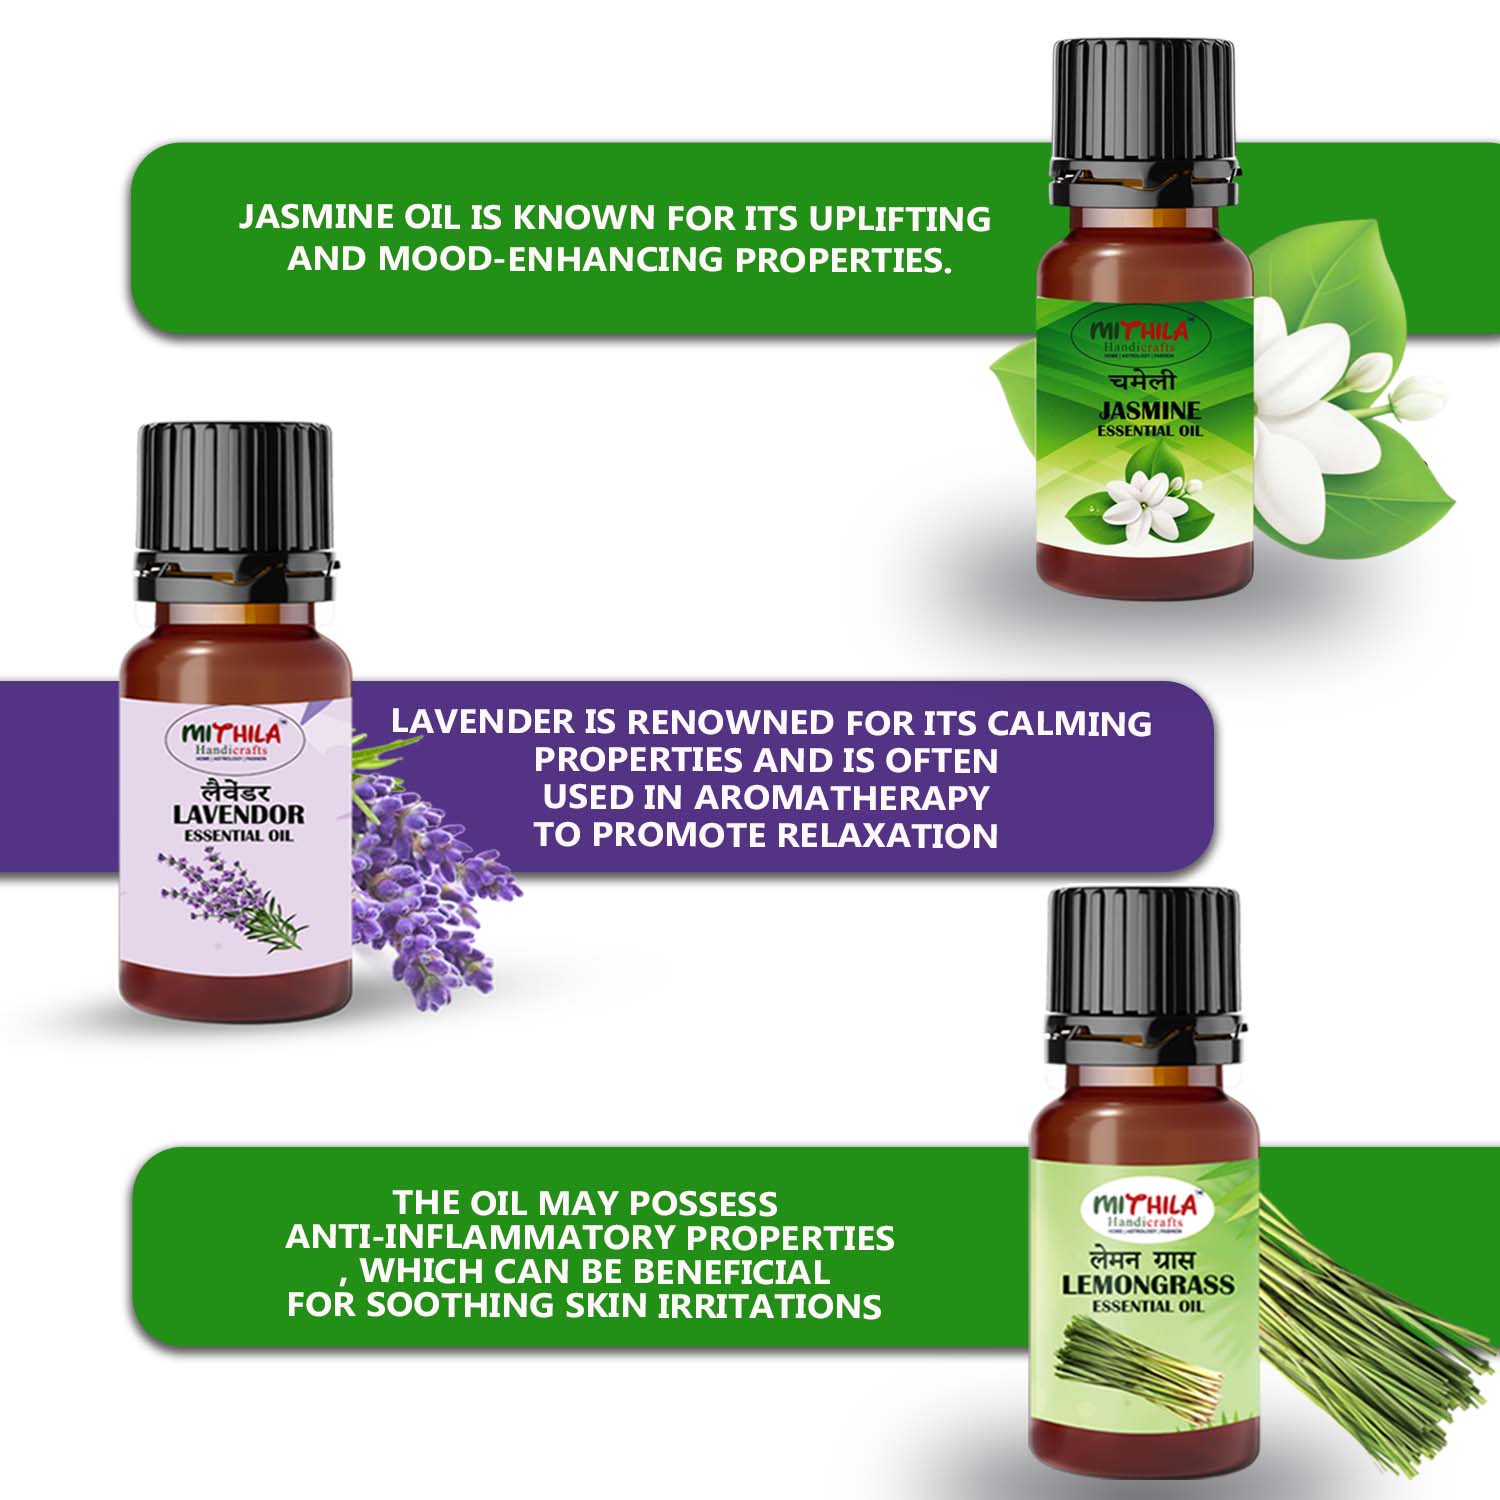 Harmony and Tranquility: A Symphony of Jasmine, Lavender, Lemongrass, Sandalwood, Peppermint, and Citronella Essential Oils 10ml Each (Pack Of 6)